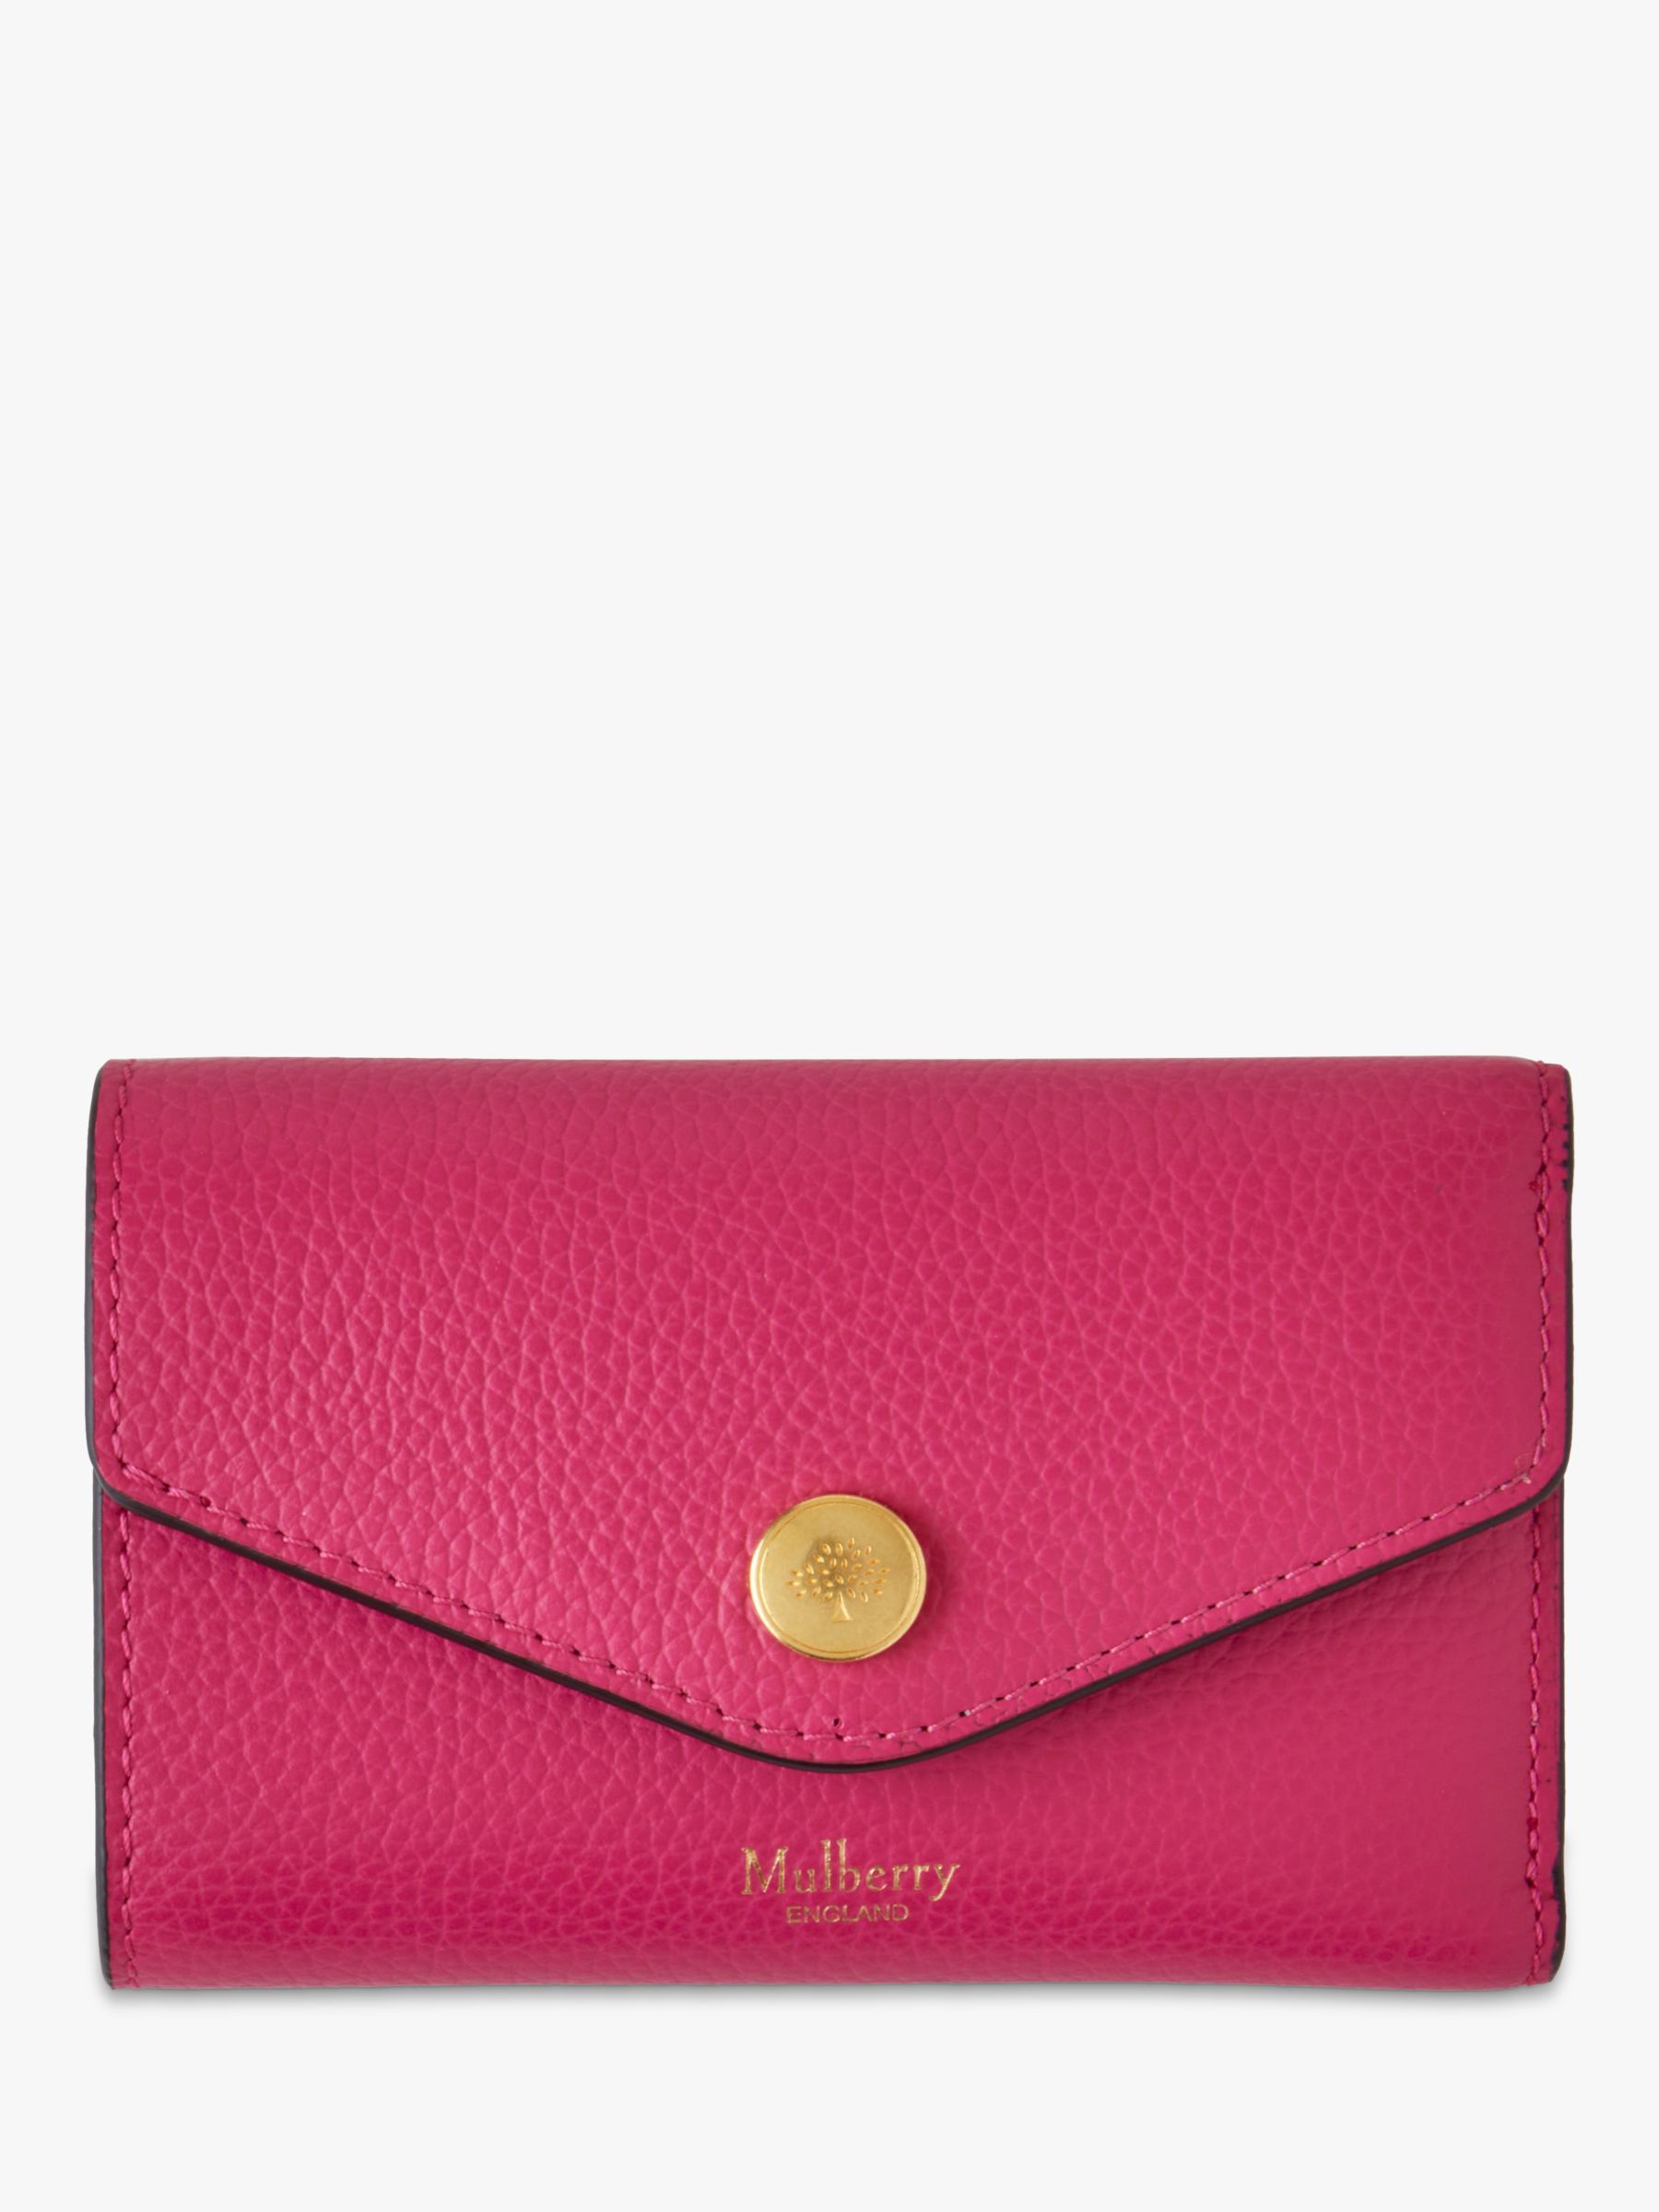 Mulberry Folded Multi-Card Small Classic Grain Leather Wallet, Mulberry ...